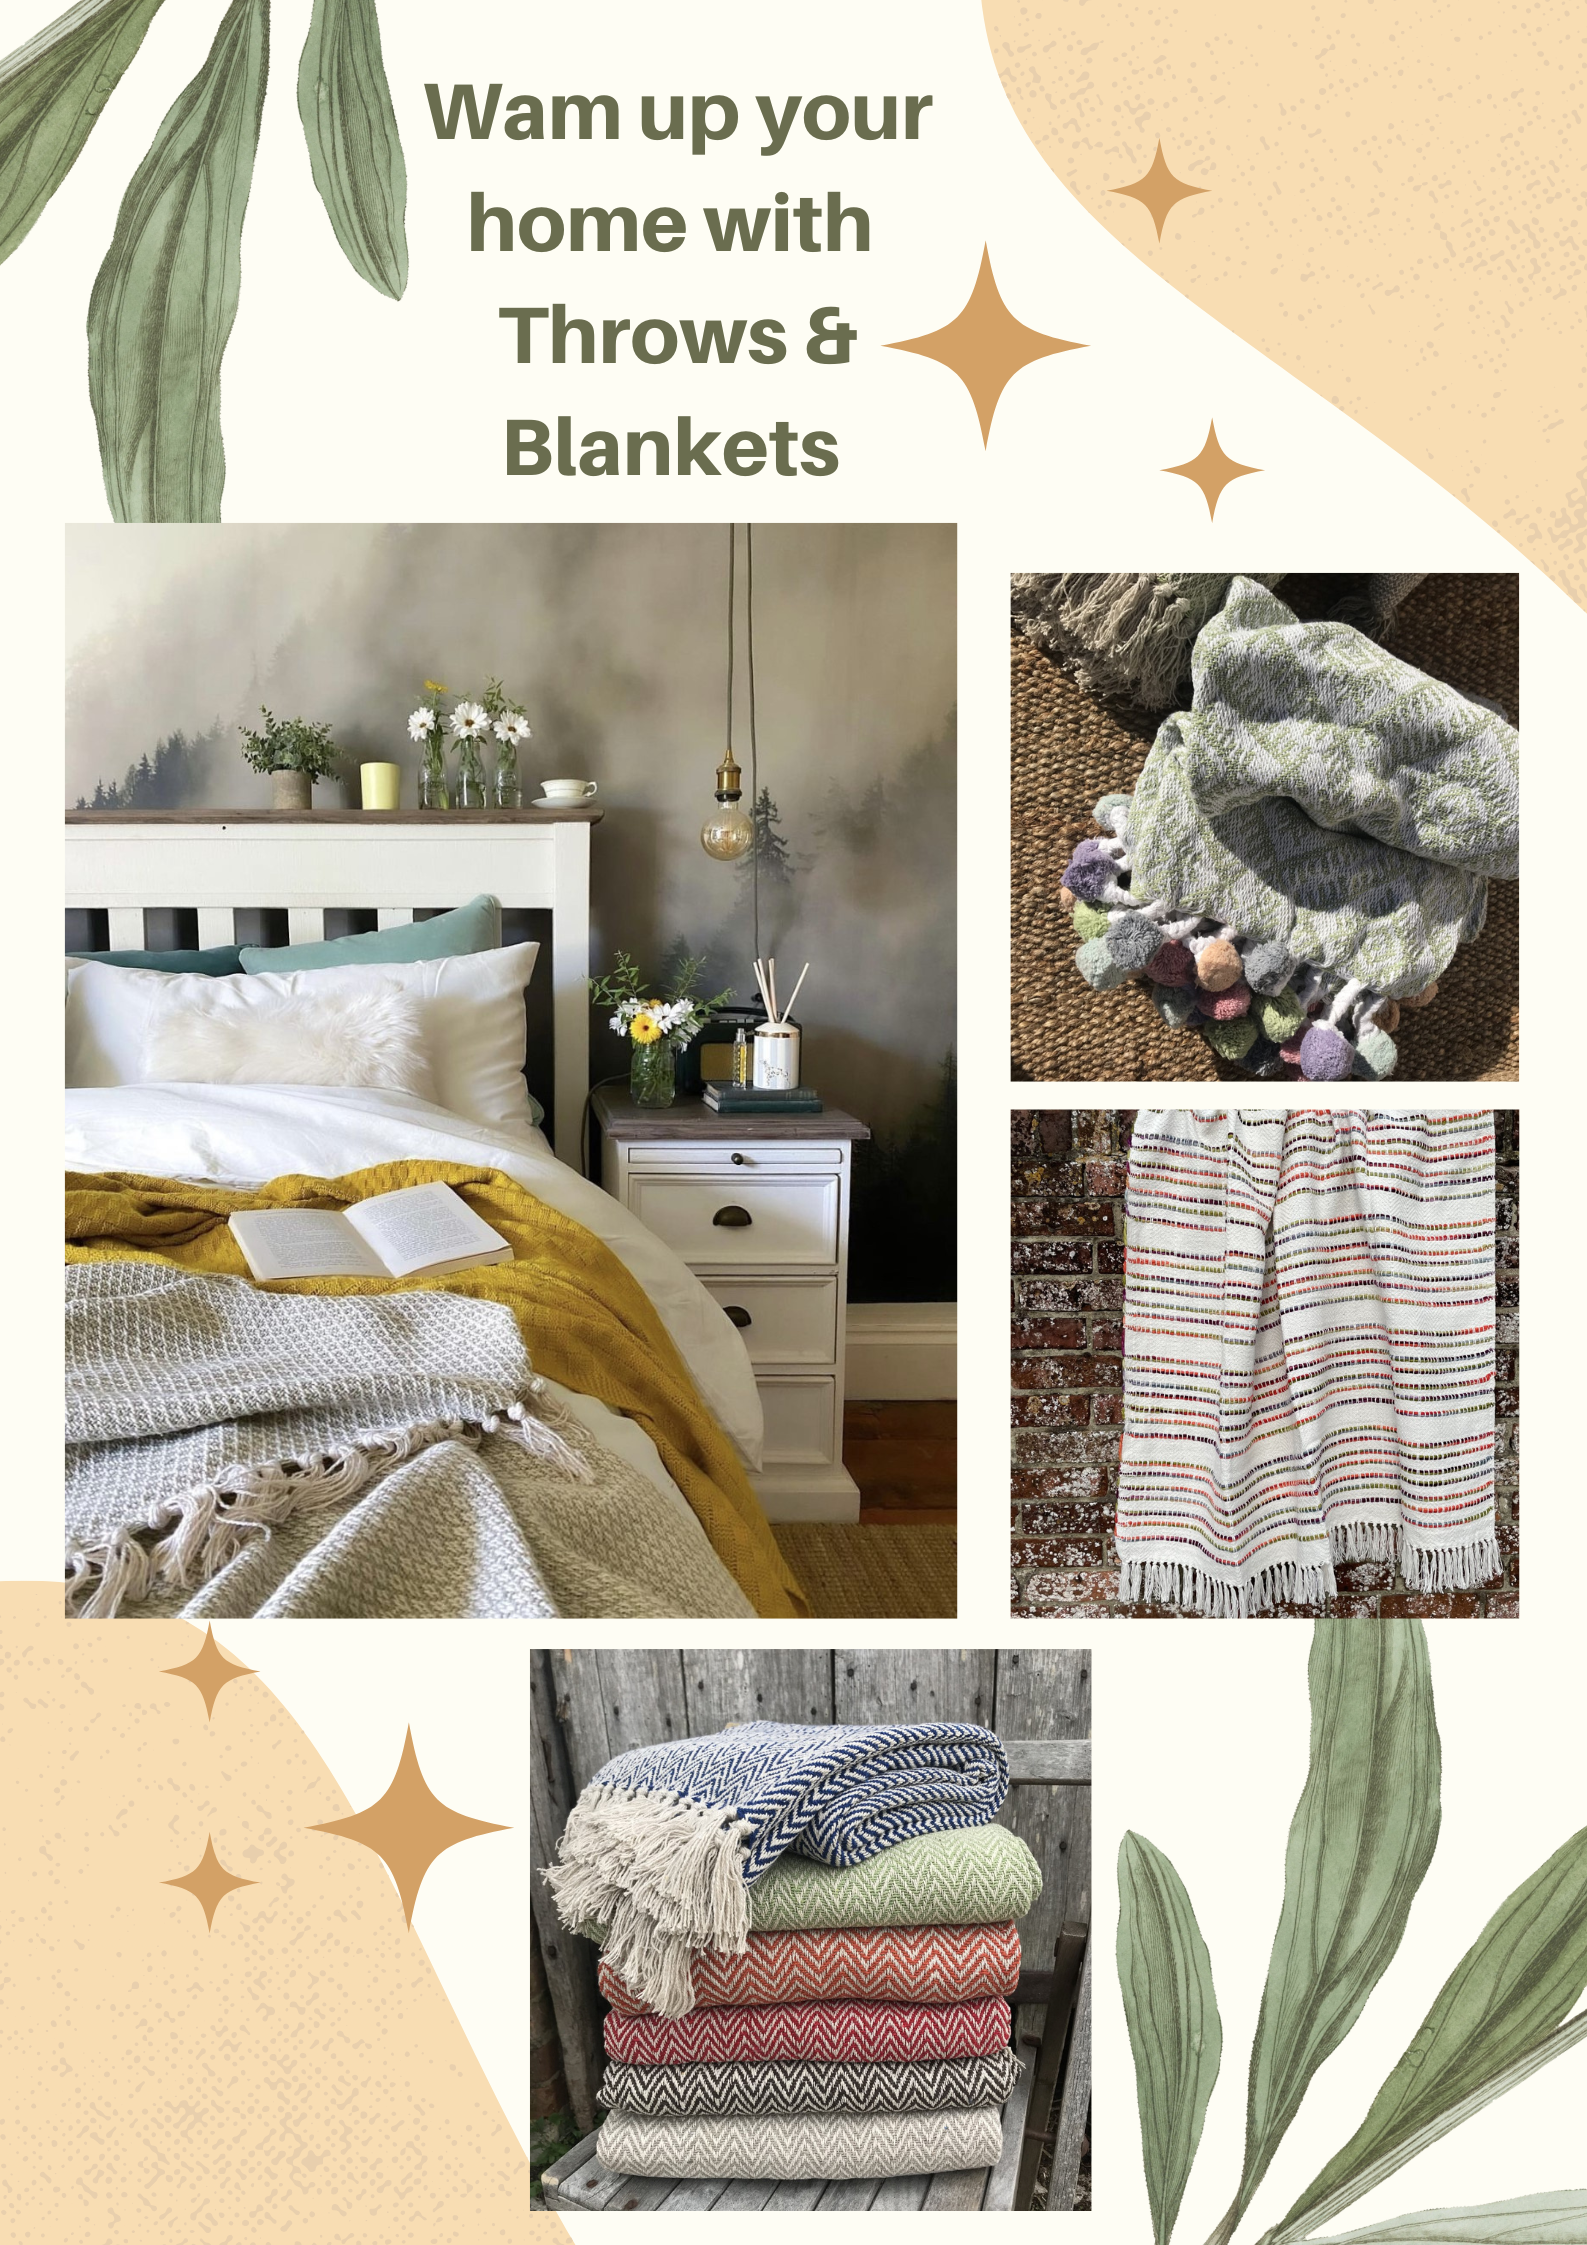 Warm up your home with Throws & Blankets..